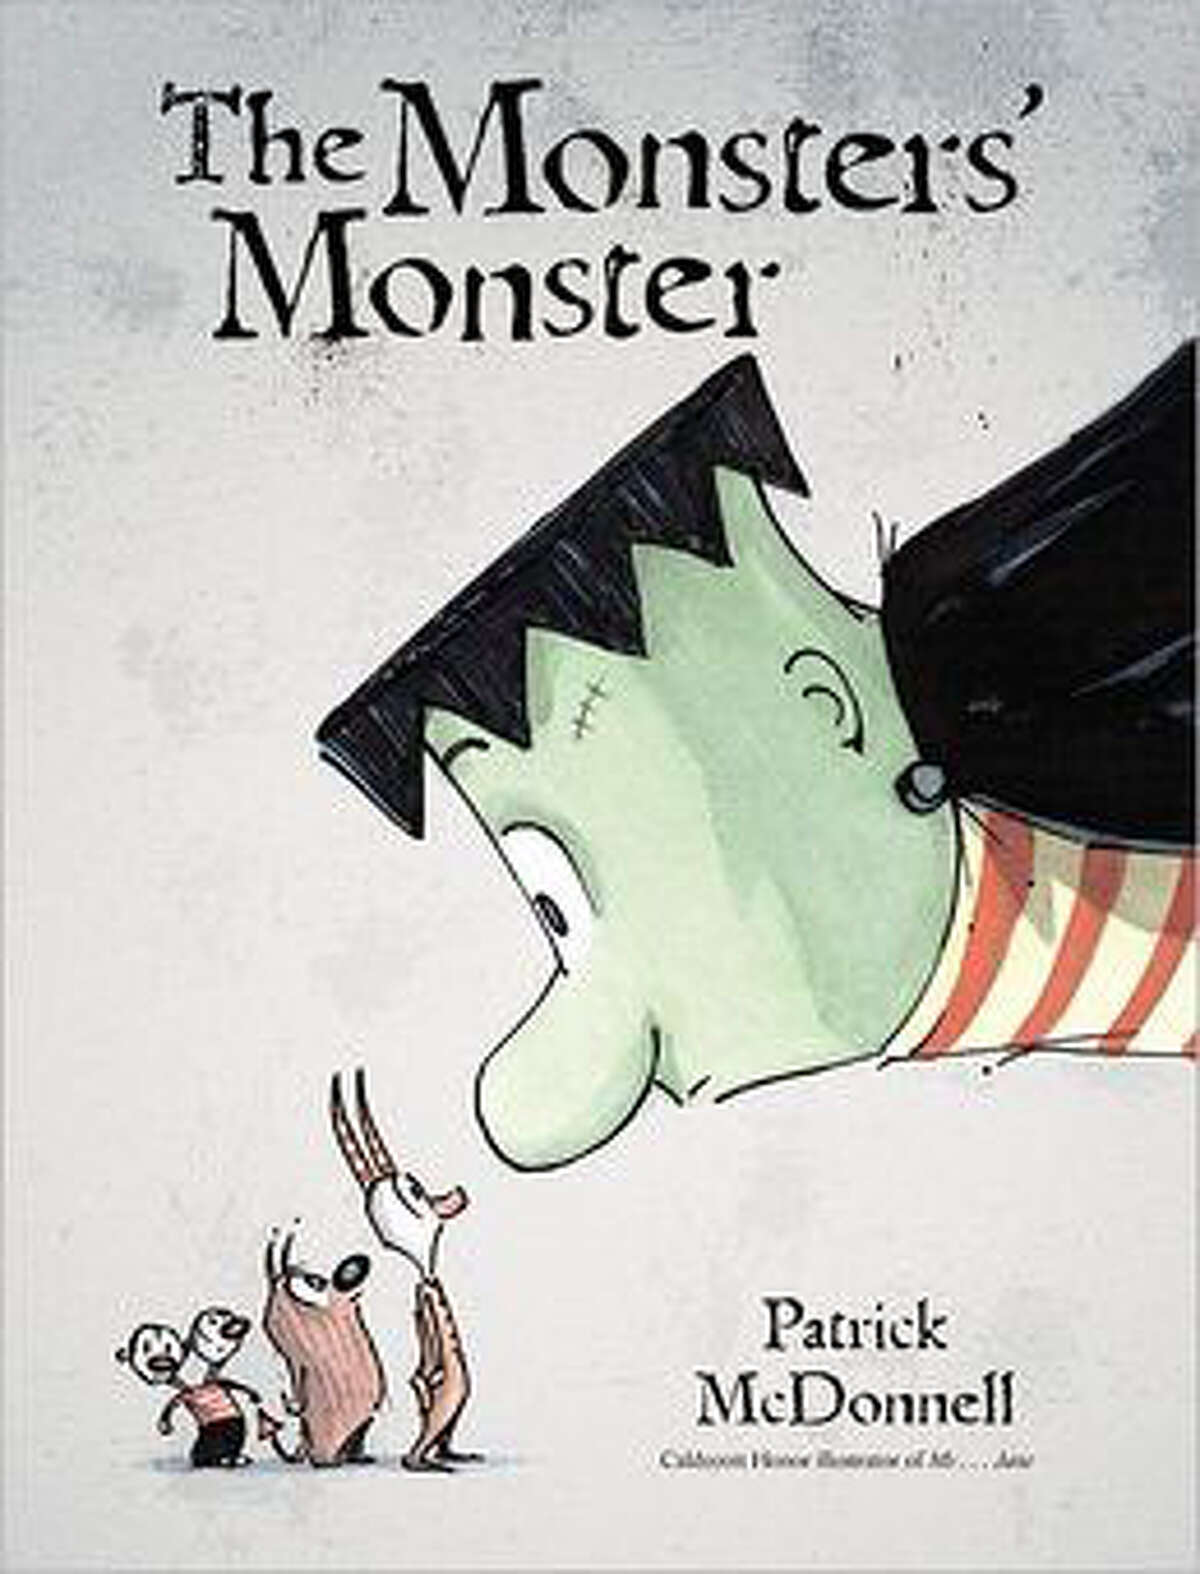 "The Monsters' Monster" by Patrick McDonnell